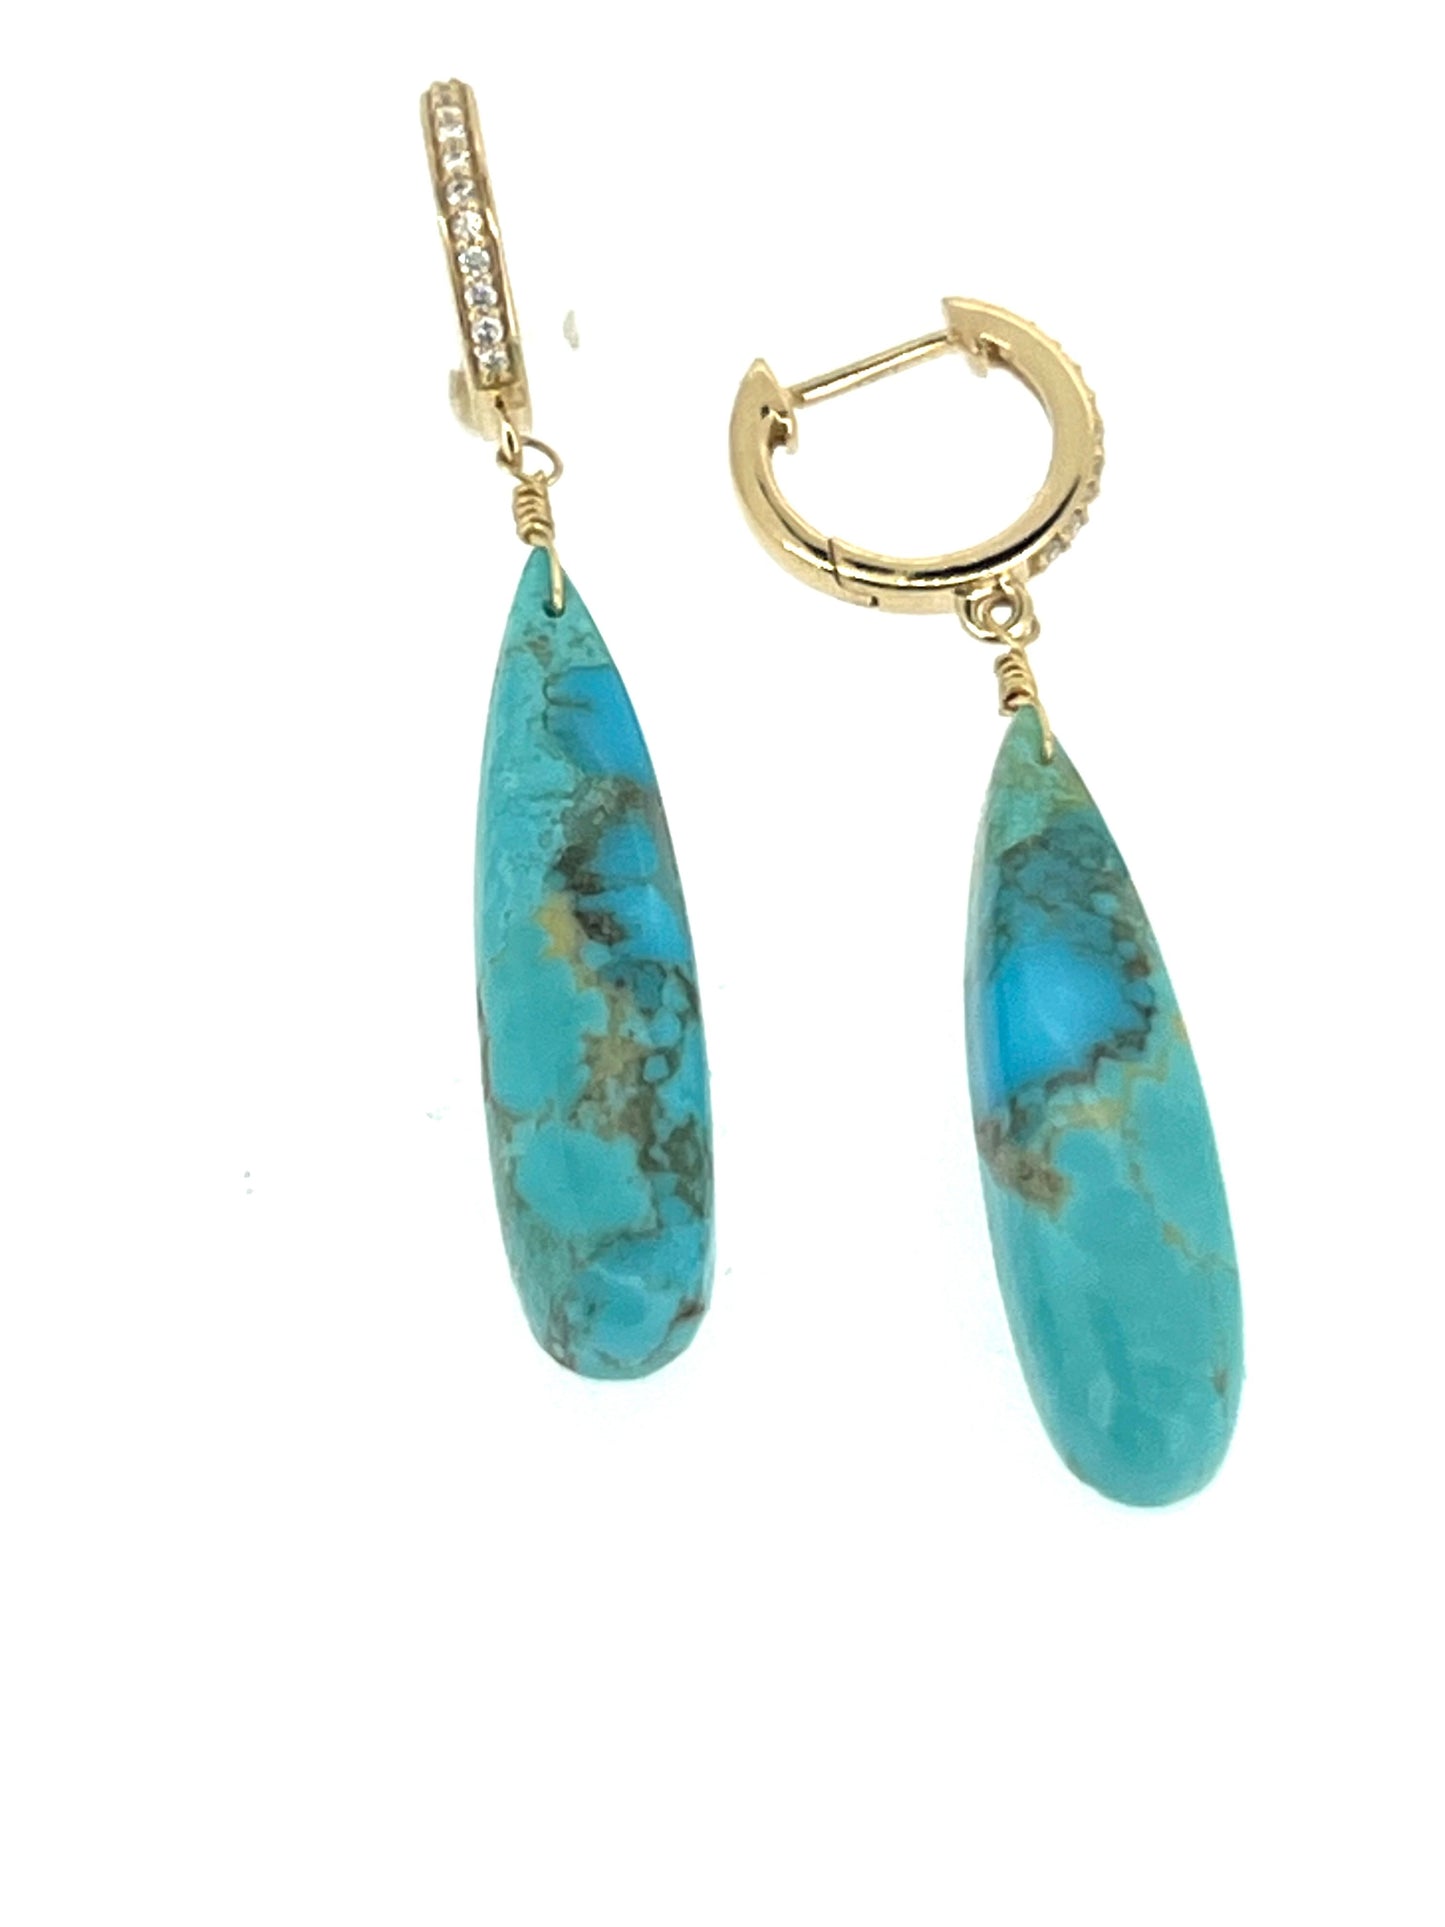 Sleeping Beauty Turquoise earring drops in 14KY gold and diamond hoops